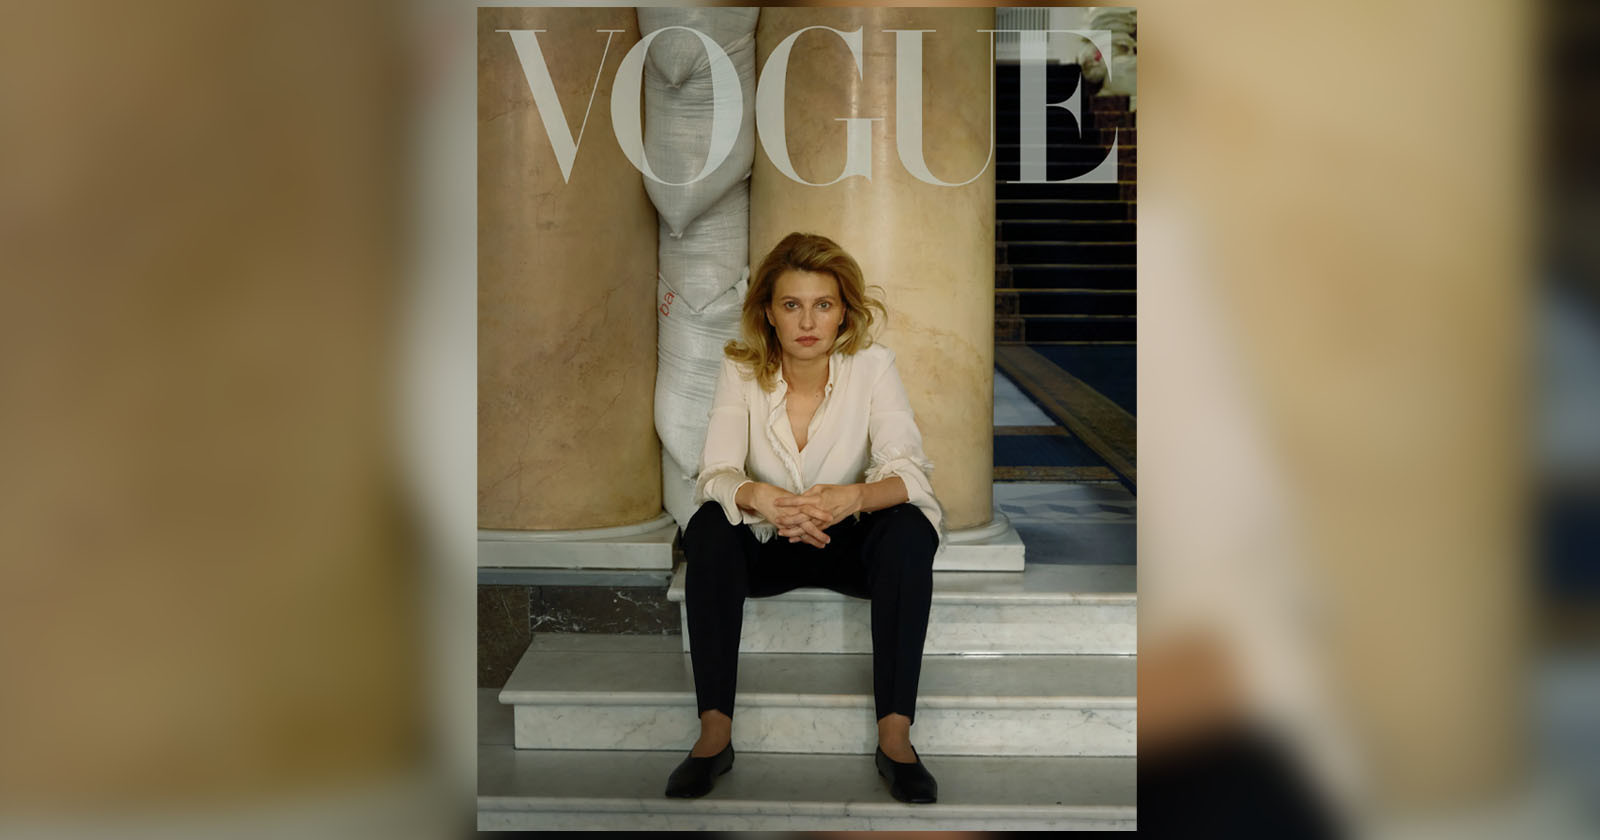 Zelenskas Vogue Photoshoot Sparks Sit Like A Girl Photo Trend